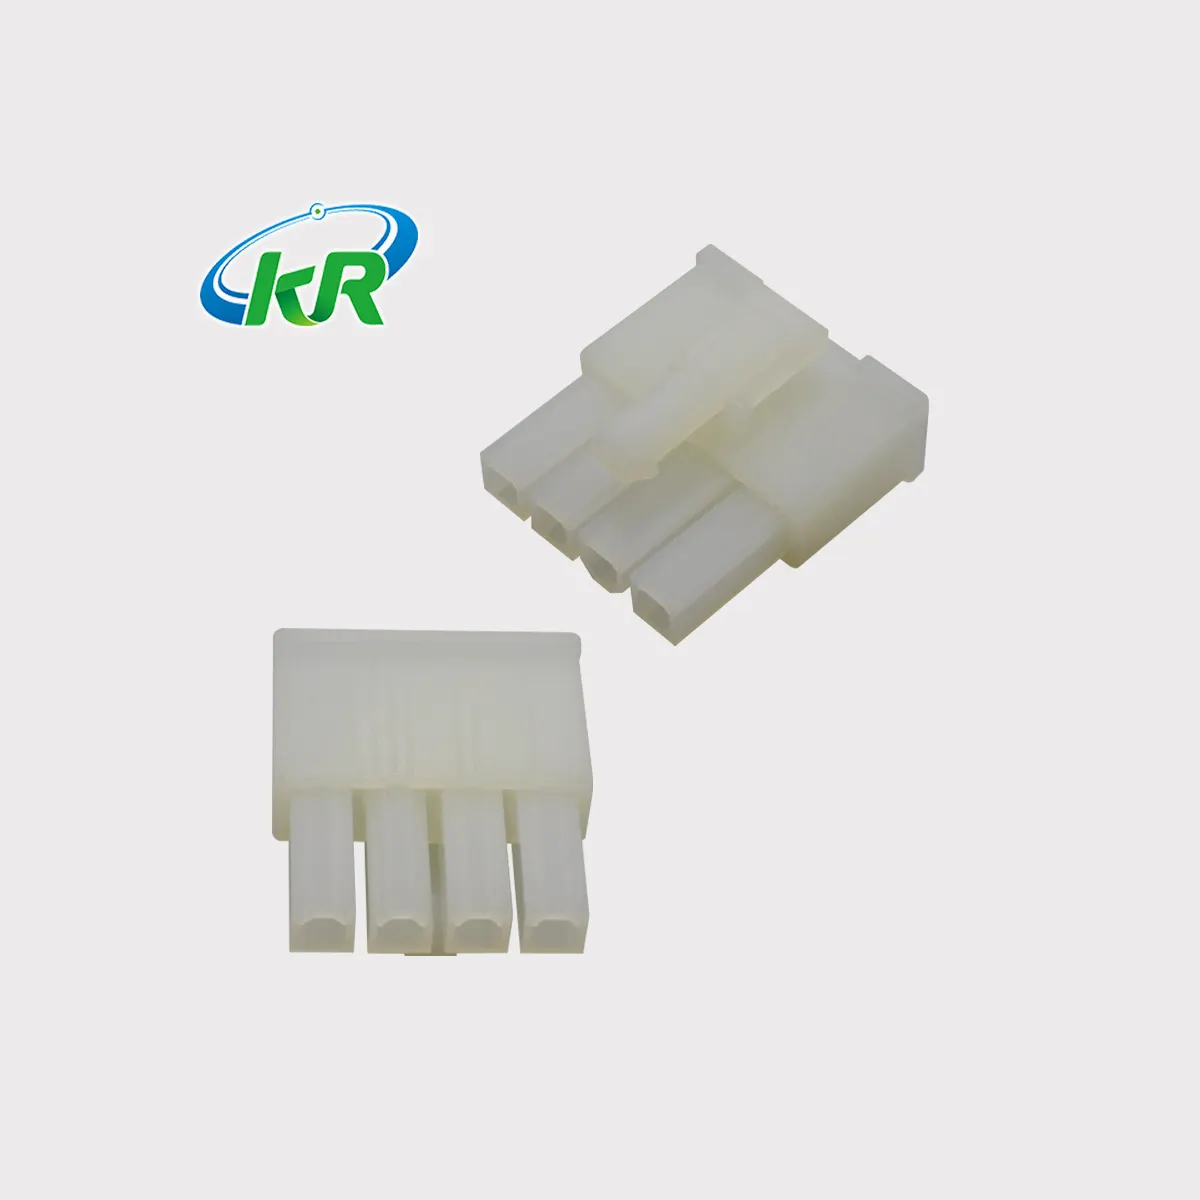 KR4200 molex 4.2mm 5557 wire to board 4pin Header Power Electric connectors